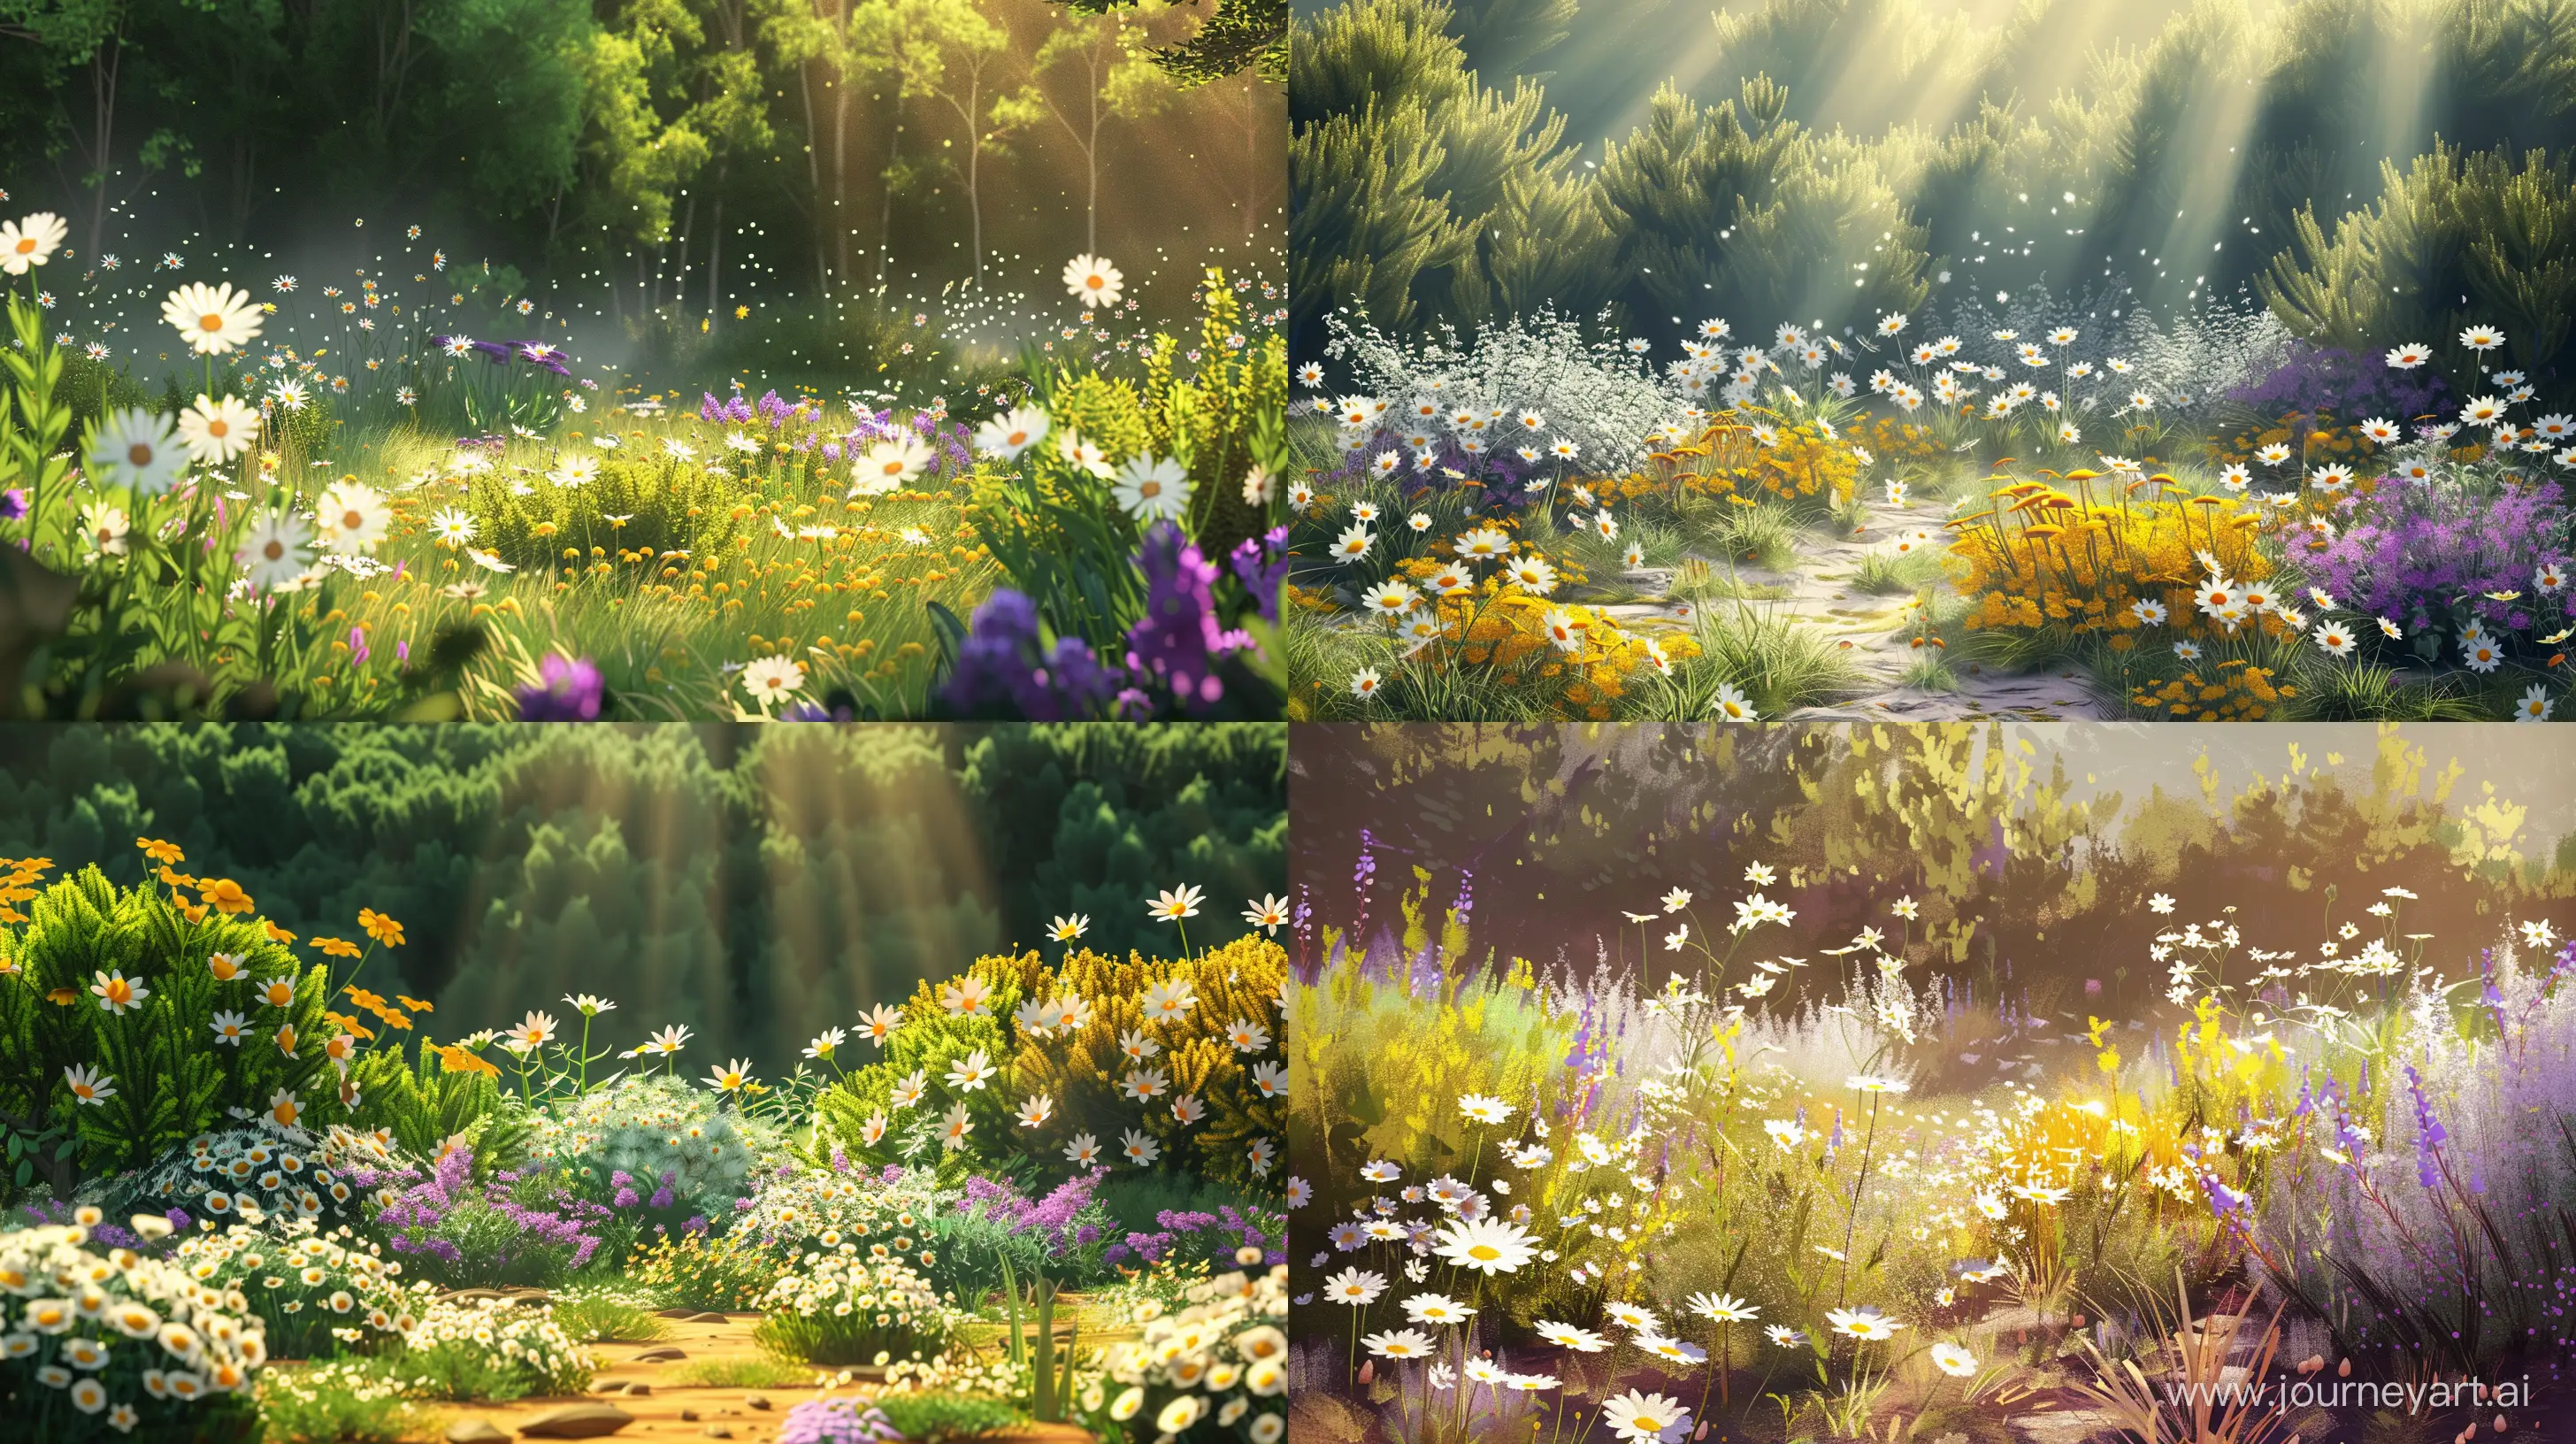 Vibrant-Meadow-with-Sunlit-Flowers-Summer-Beauty-in-2D-Illustration